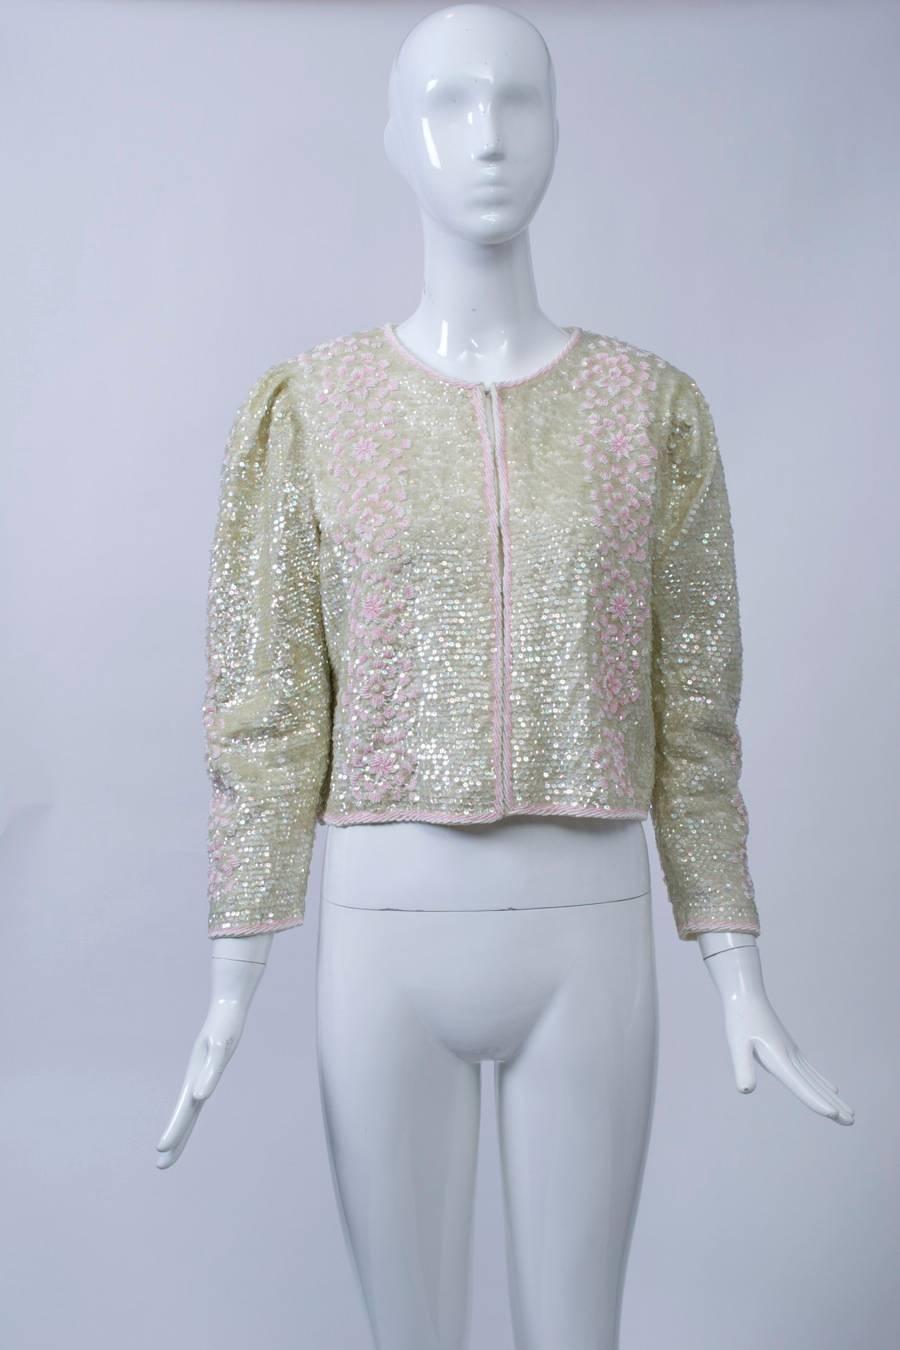 1980s hook-front cardigan allover sequined in iridescent off-white accented by pink beading around the borders and in a vertical floral pattern front and back and down the sleeves. Shirred shoulders, shoulder pads, lined.